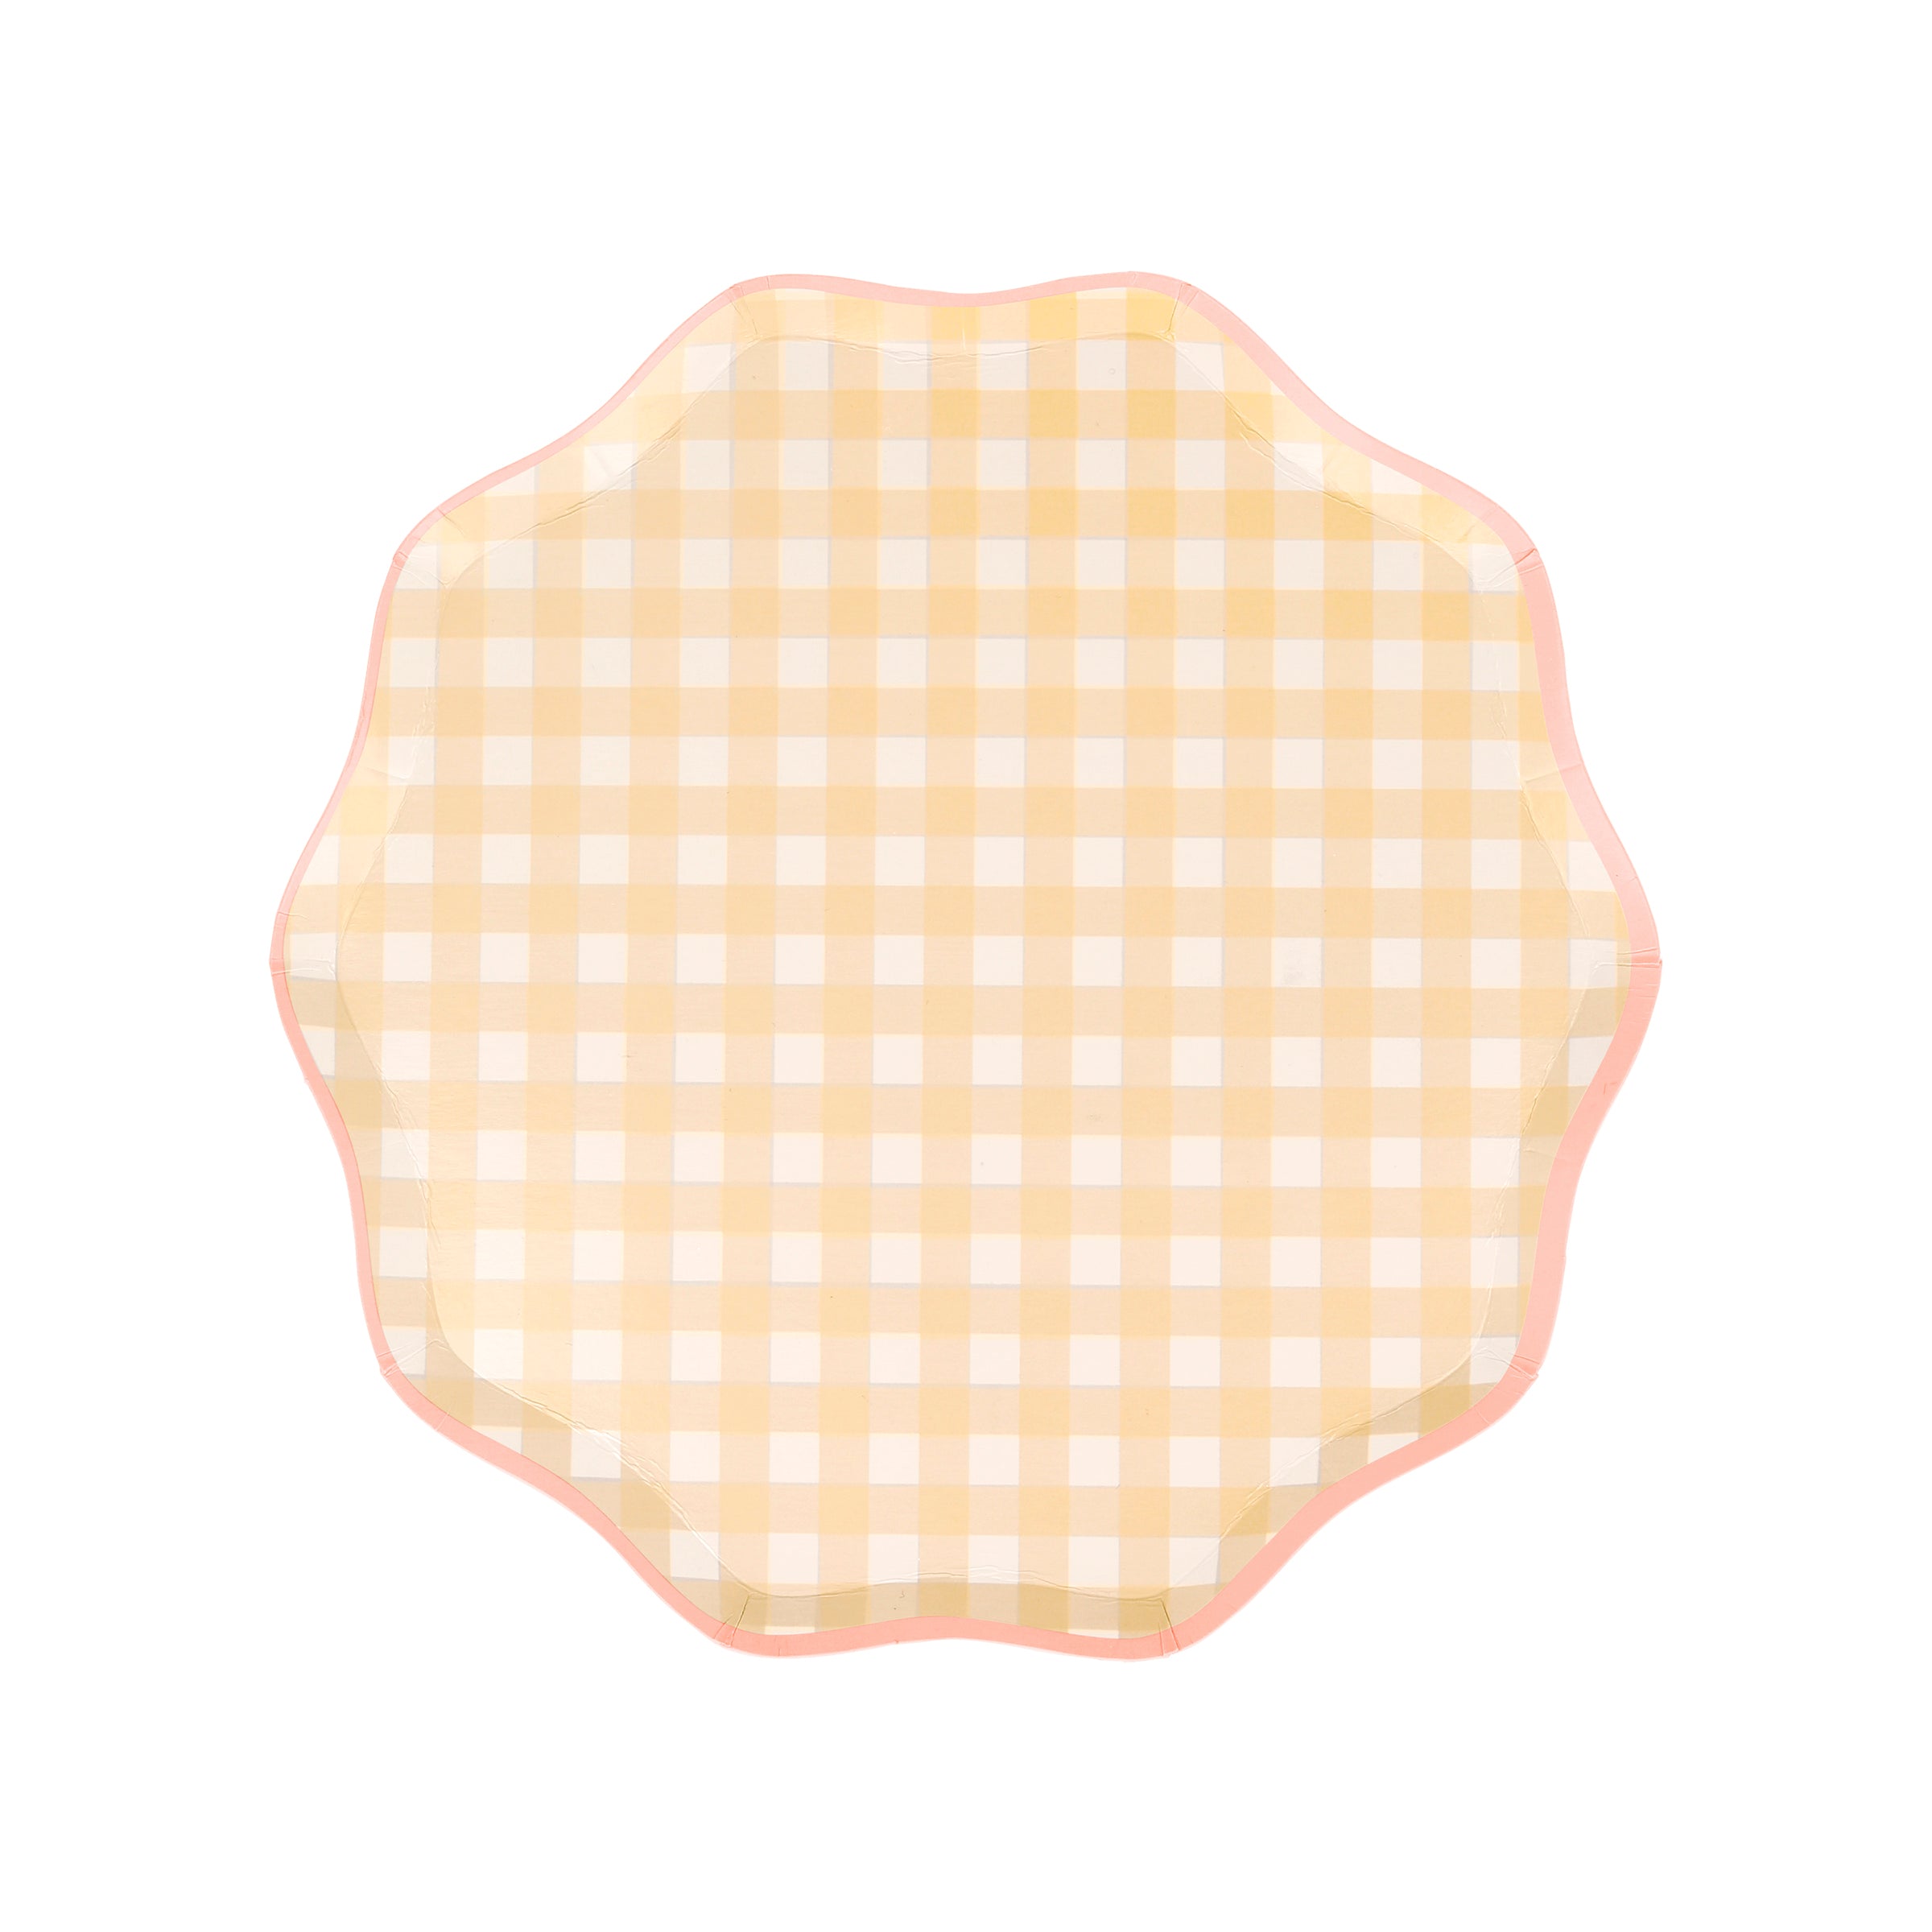 Our gingham plates come in four pastel shades, perfect for spring or summer parties.